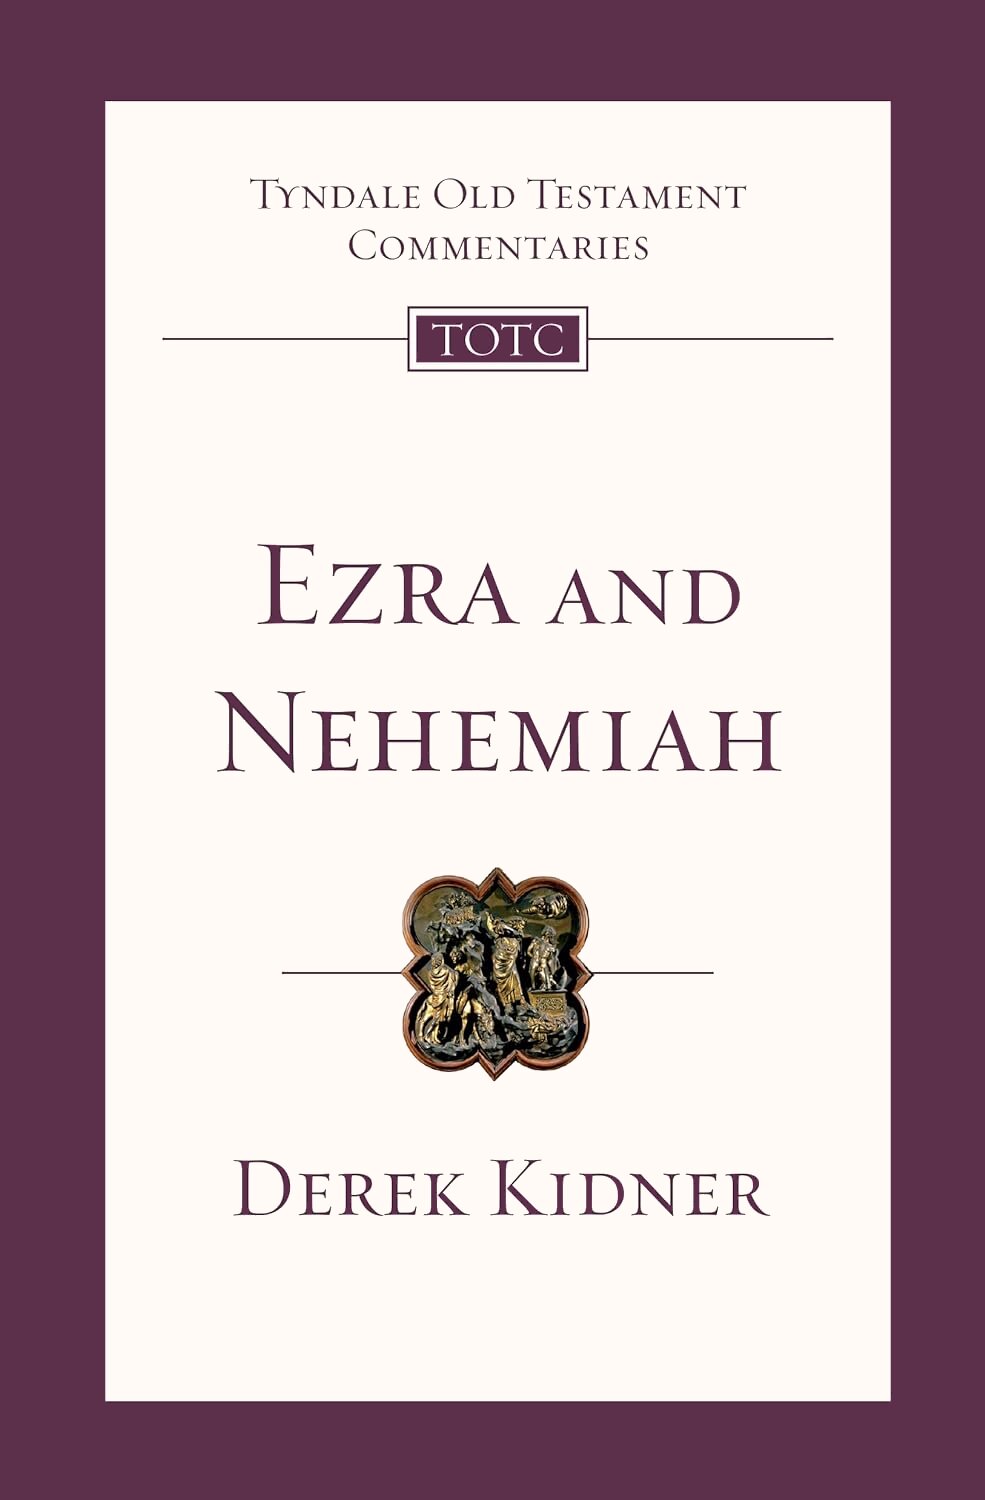 Ezra and Nehemiah (Tyndale Old Testament Commentaries | TOTC)